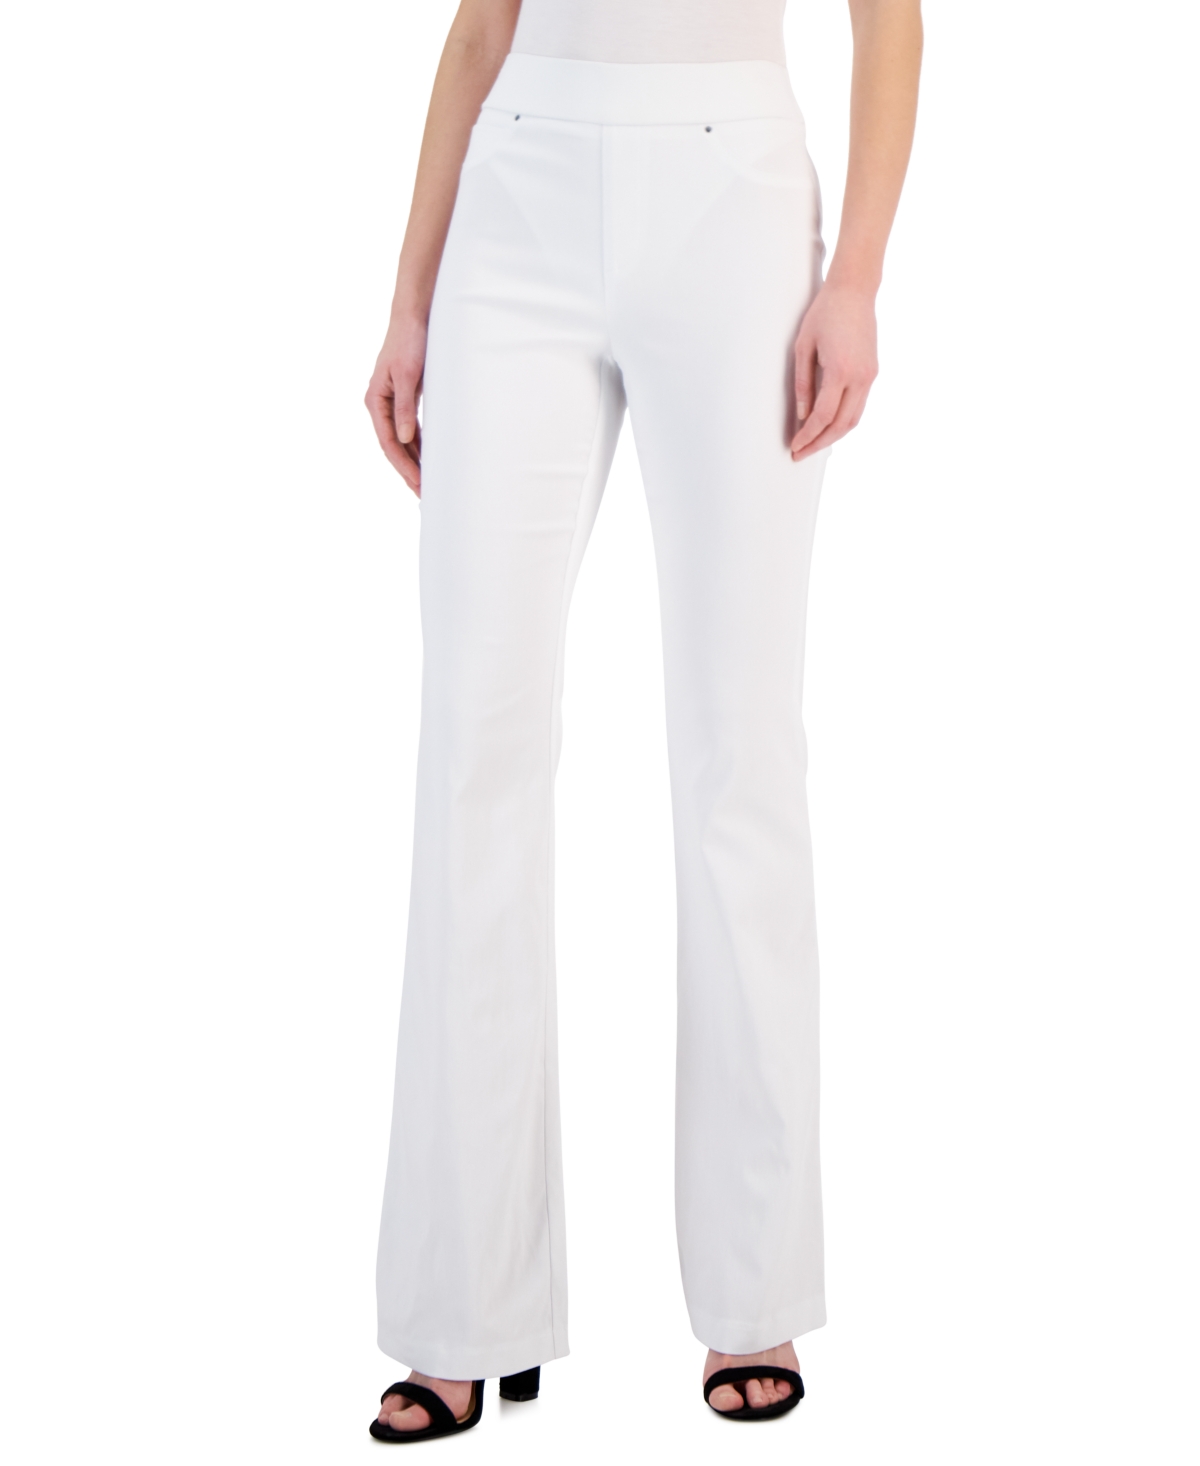 Women's High-Rise Pull-On Flare-Leg Pants, Created for Macy's - Toasted Twine